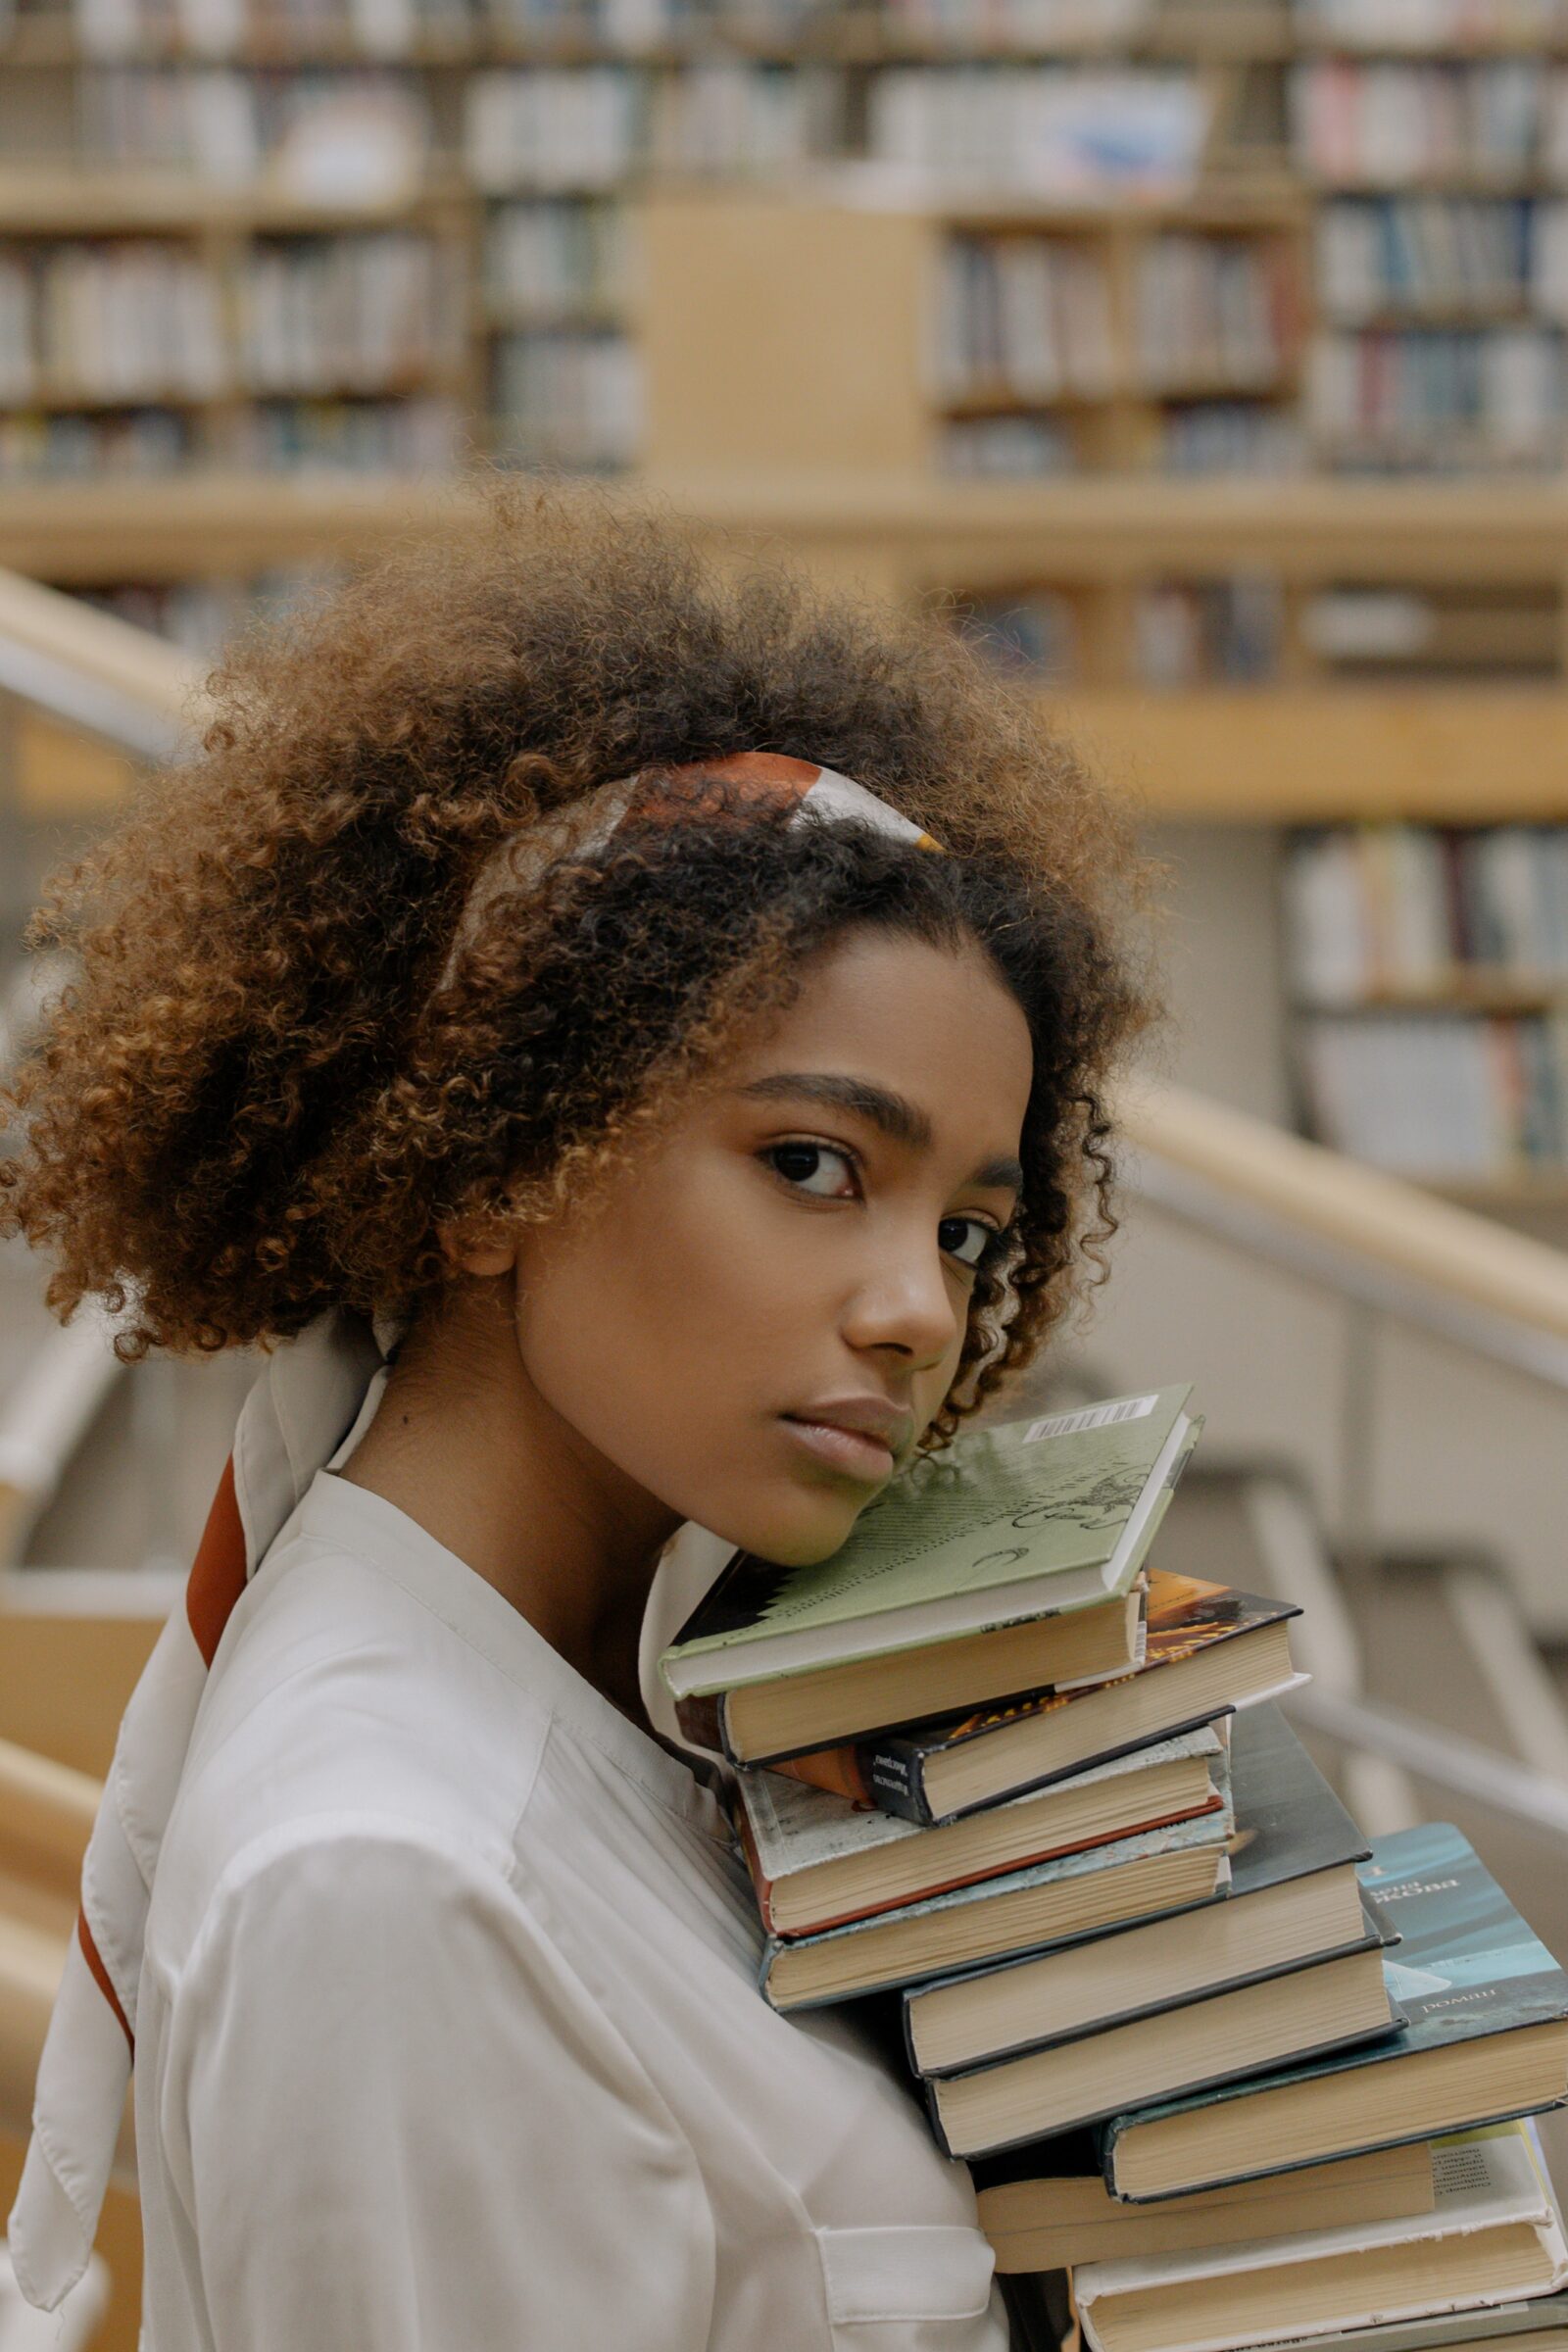 young woman with curly hair holding a stack of books